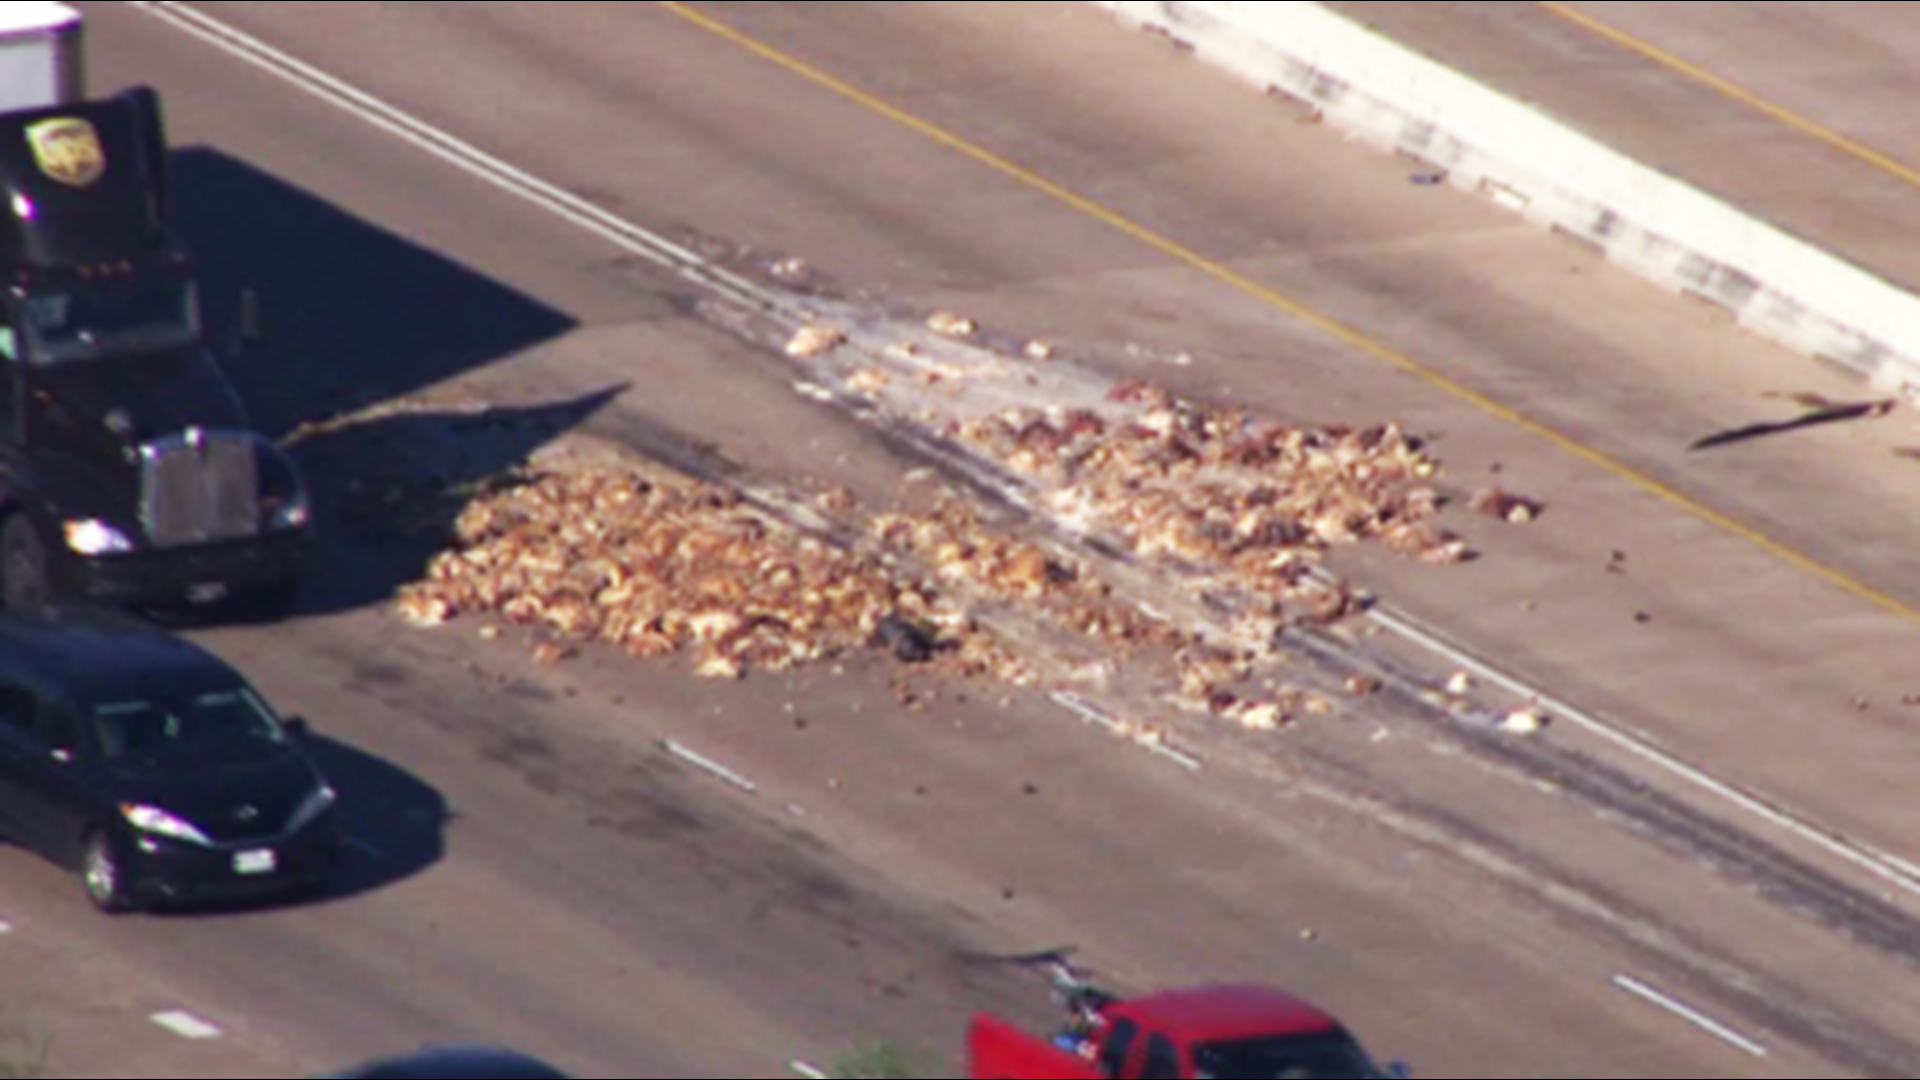 Air 11 is over the Southwest Freeway north of Highway 6 where a truck accidentally spilled pig by-products, city officials say.